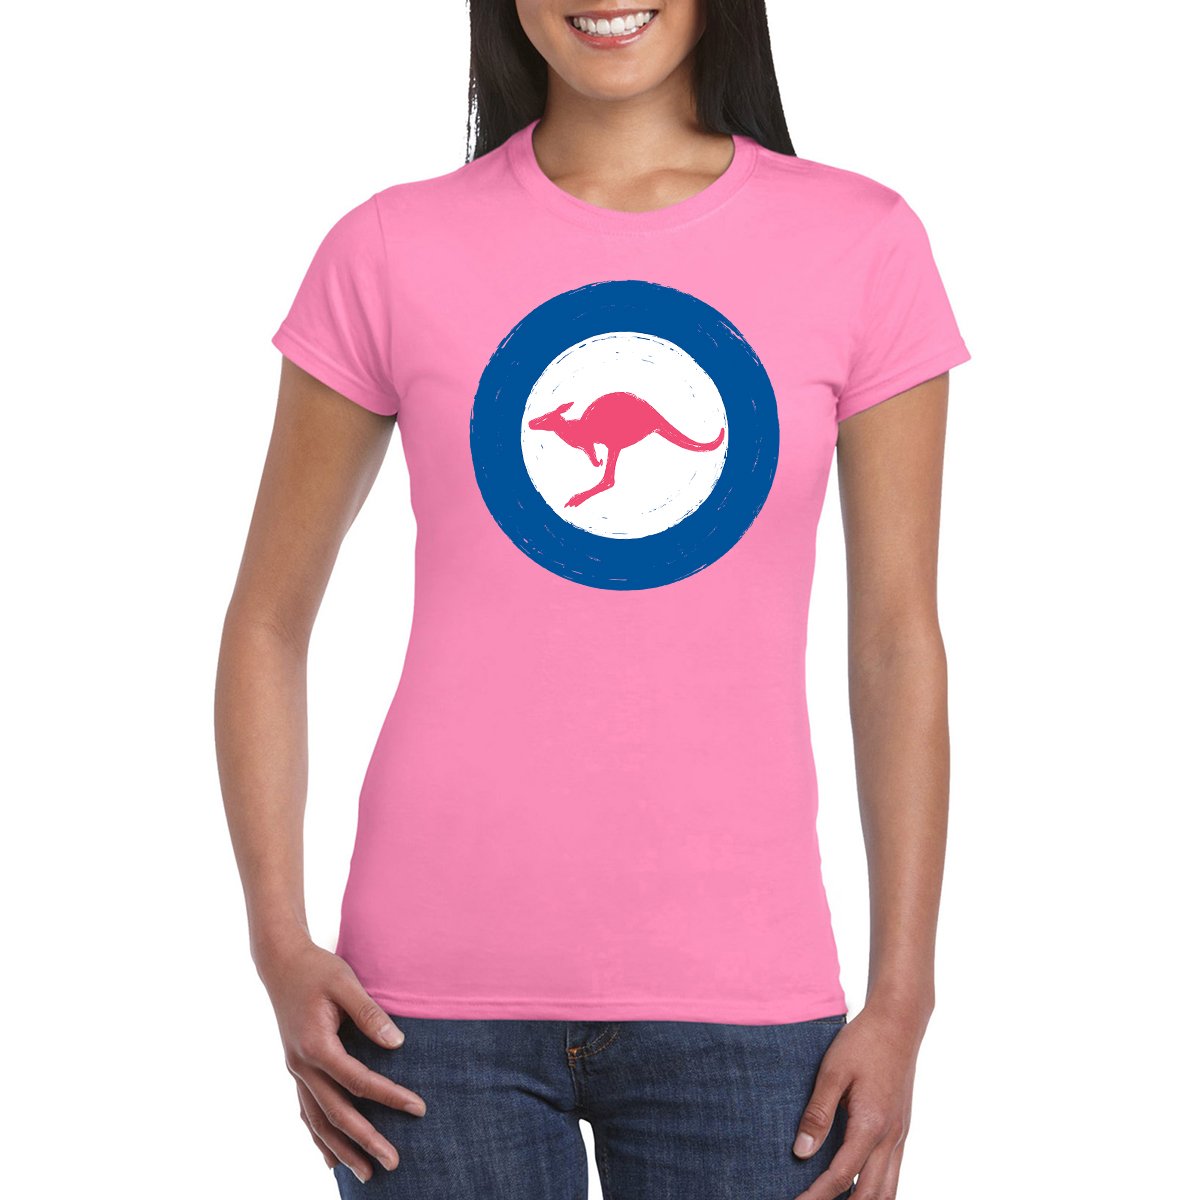 ROUNDEL Woman's Semi-Fitted T-Shirt